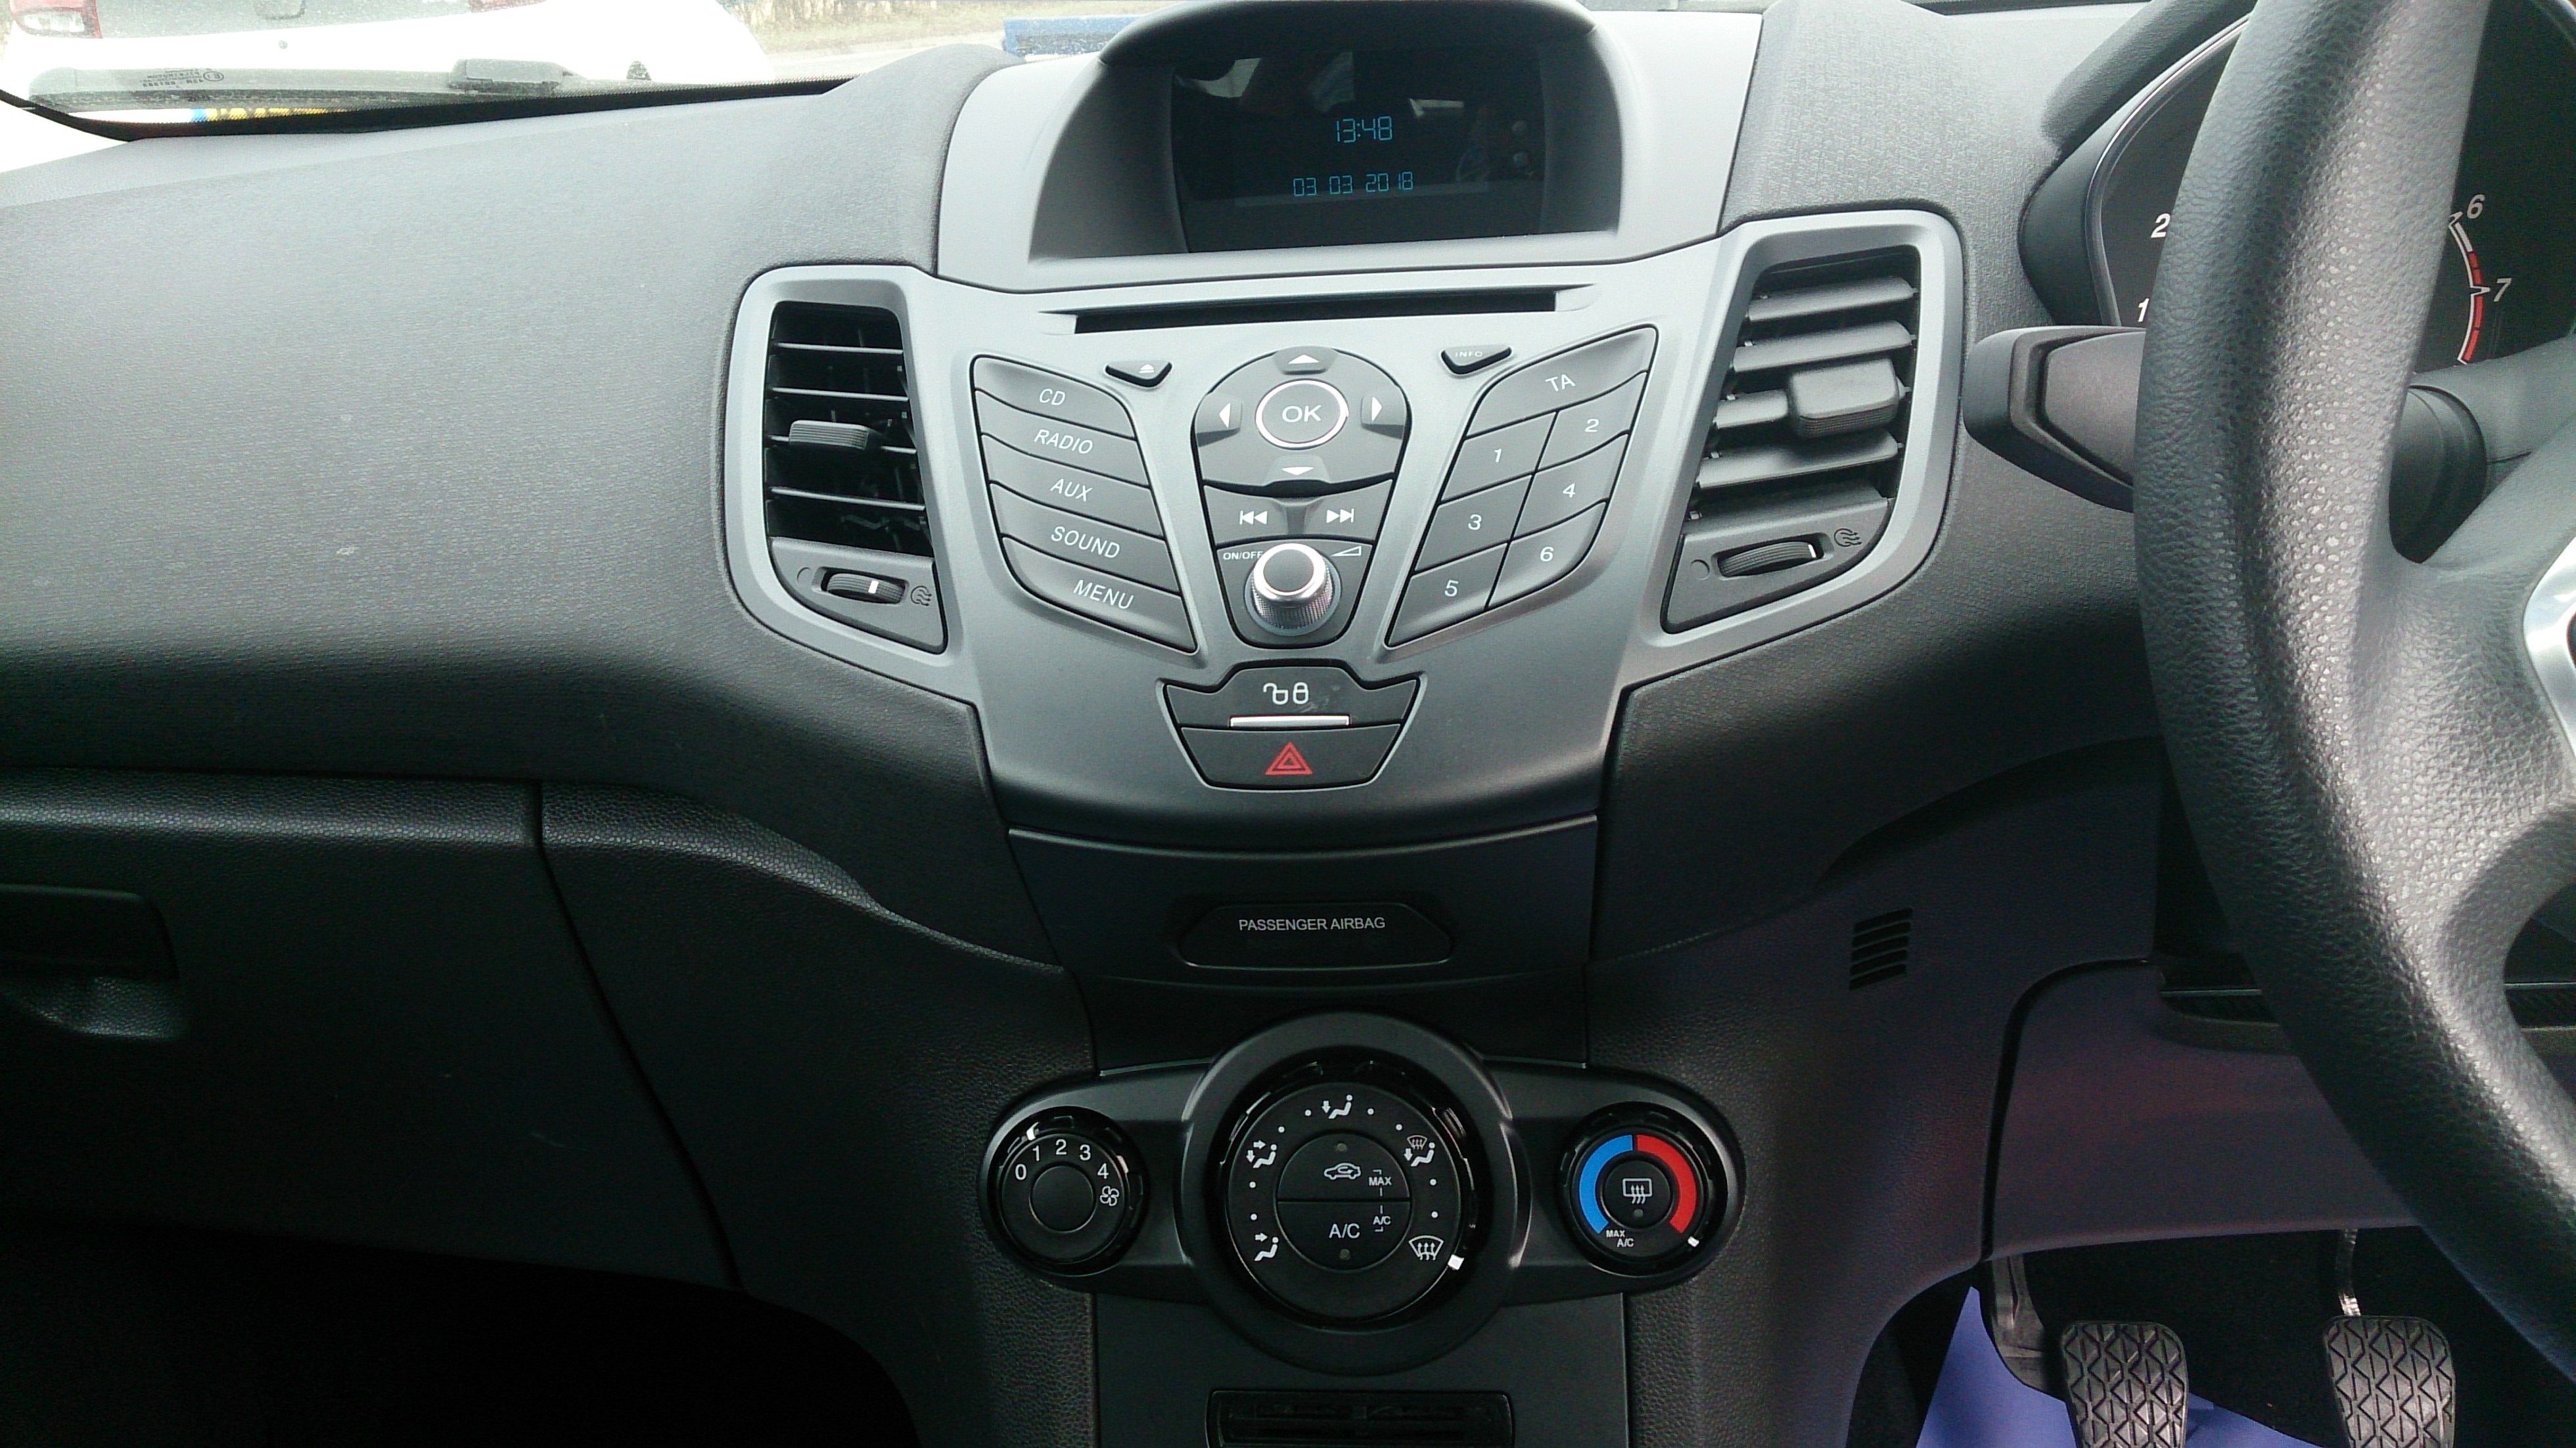 Upgrading non bluetooth stereo with bluetooth version - Ford